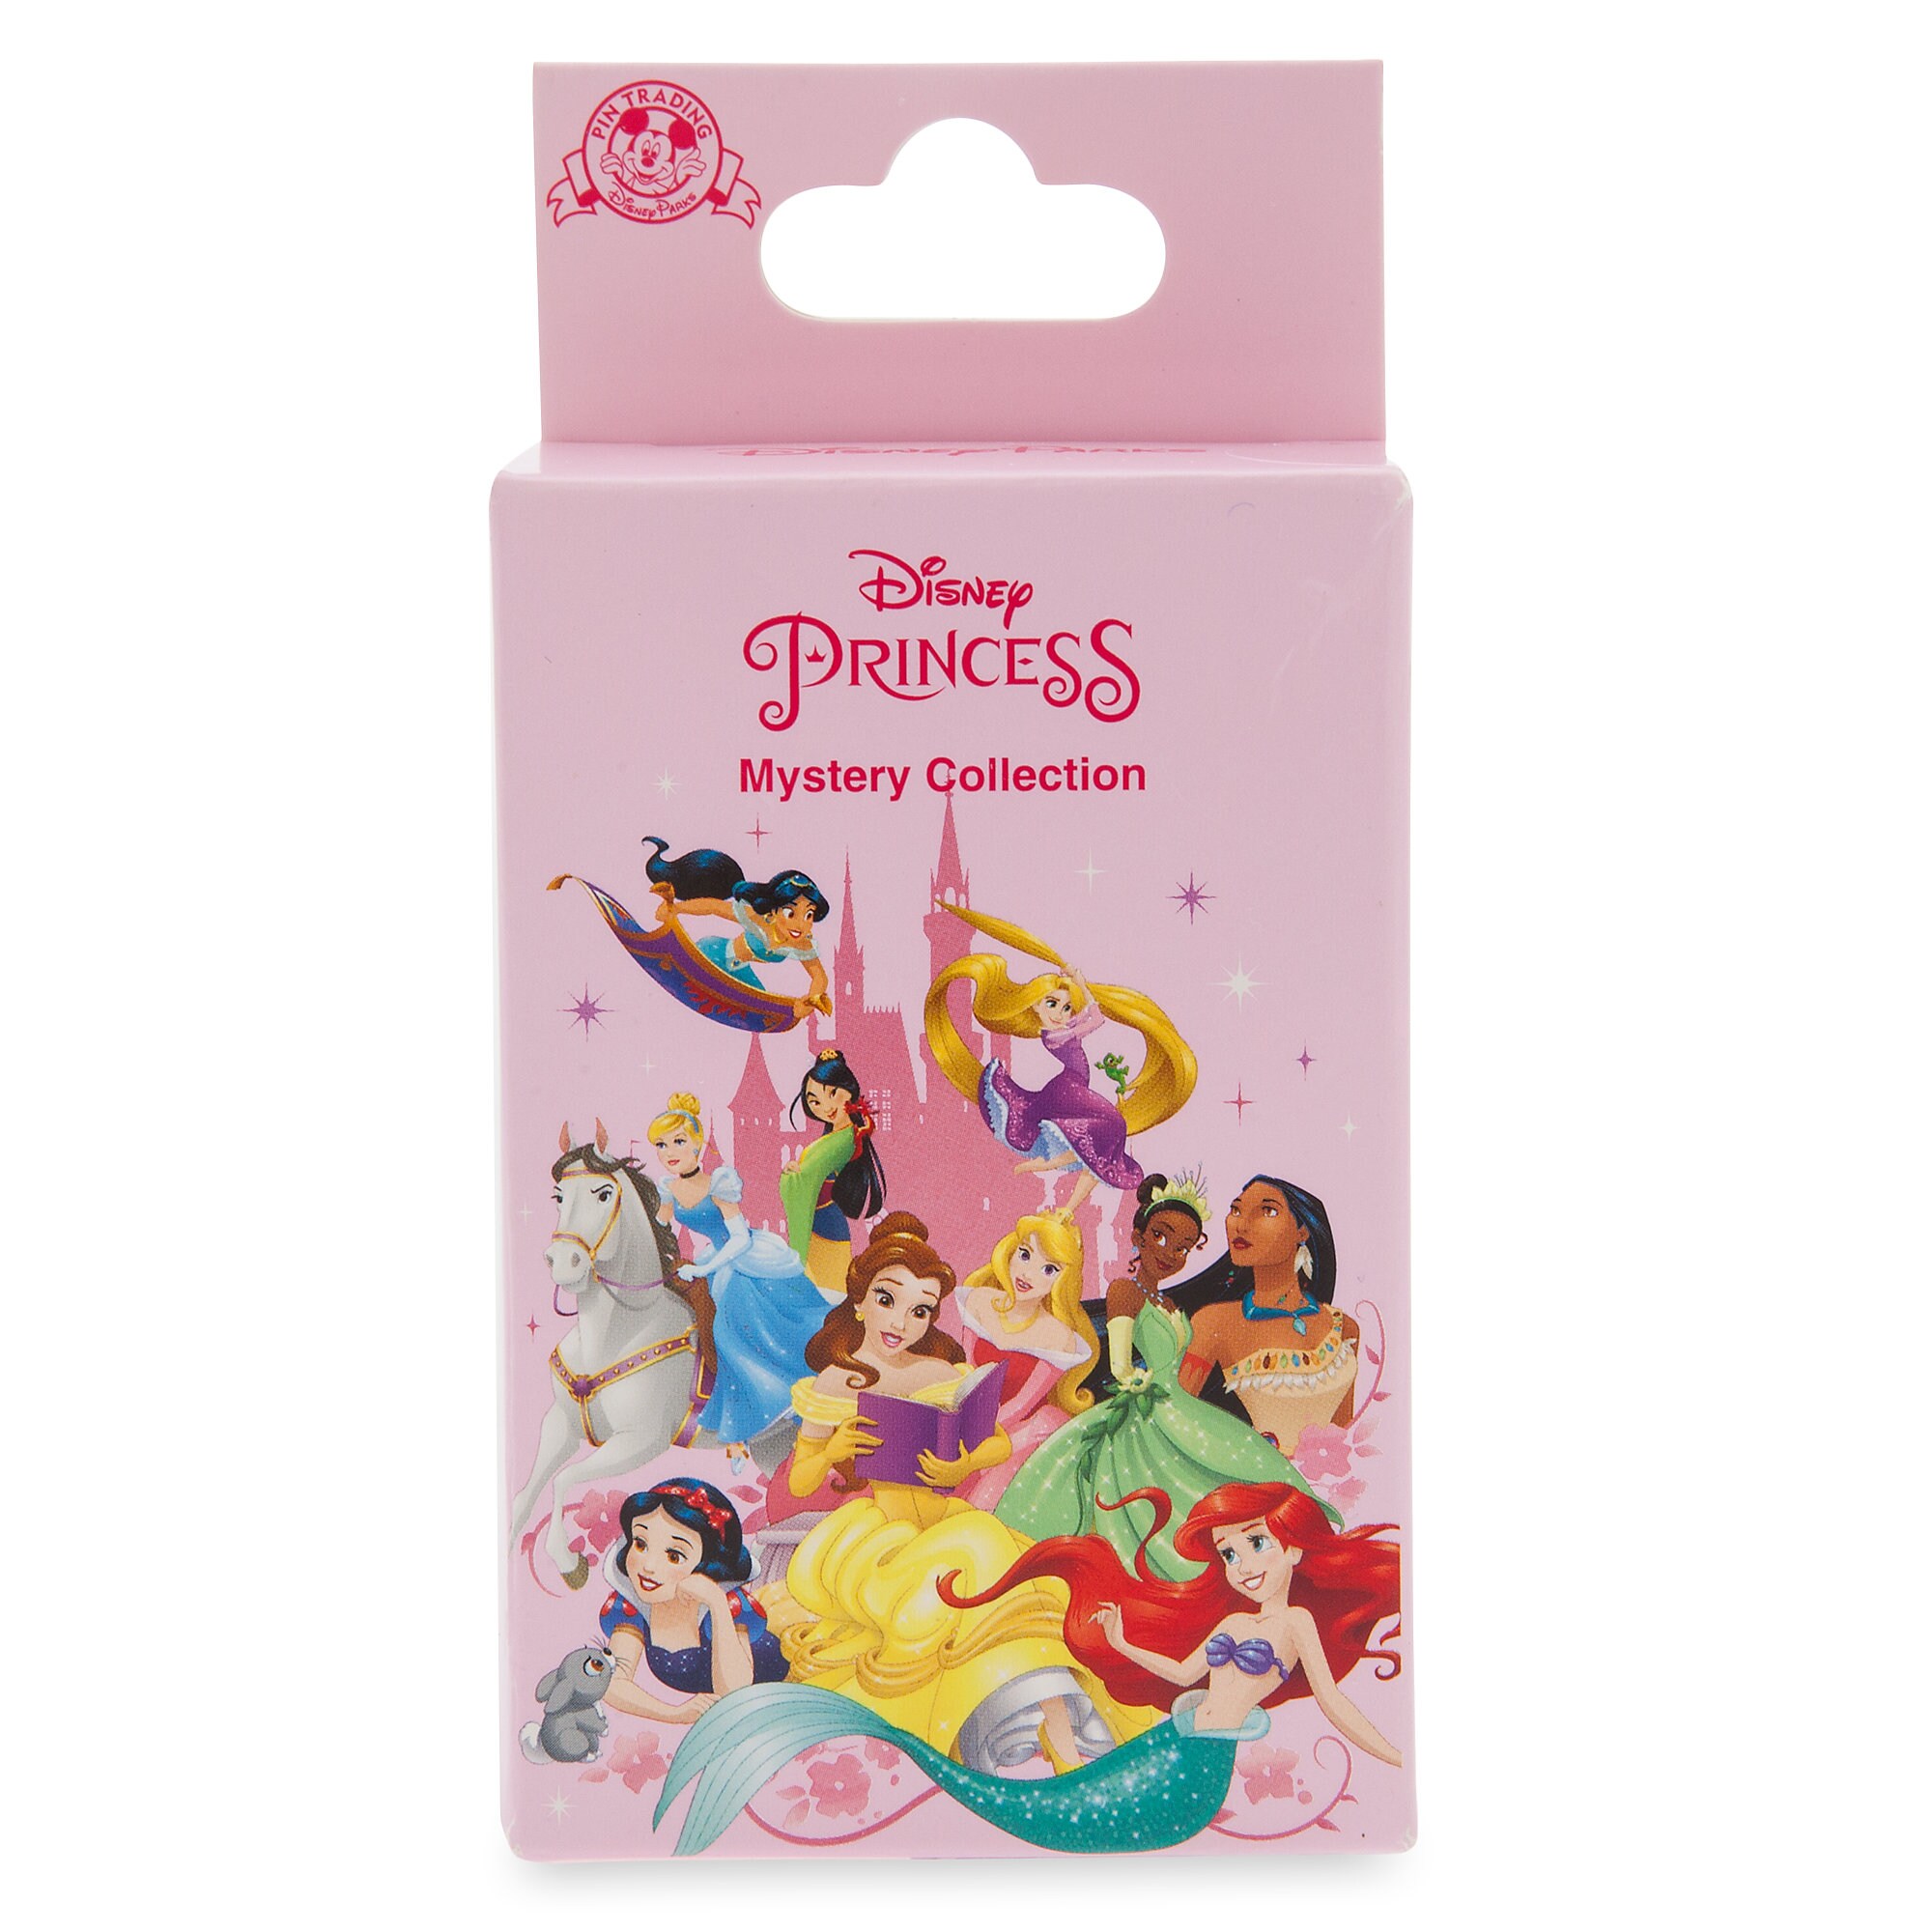 Disney Princess Mystery Pin Set is available online for